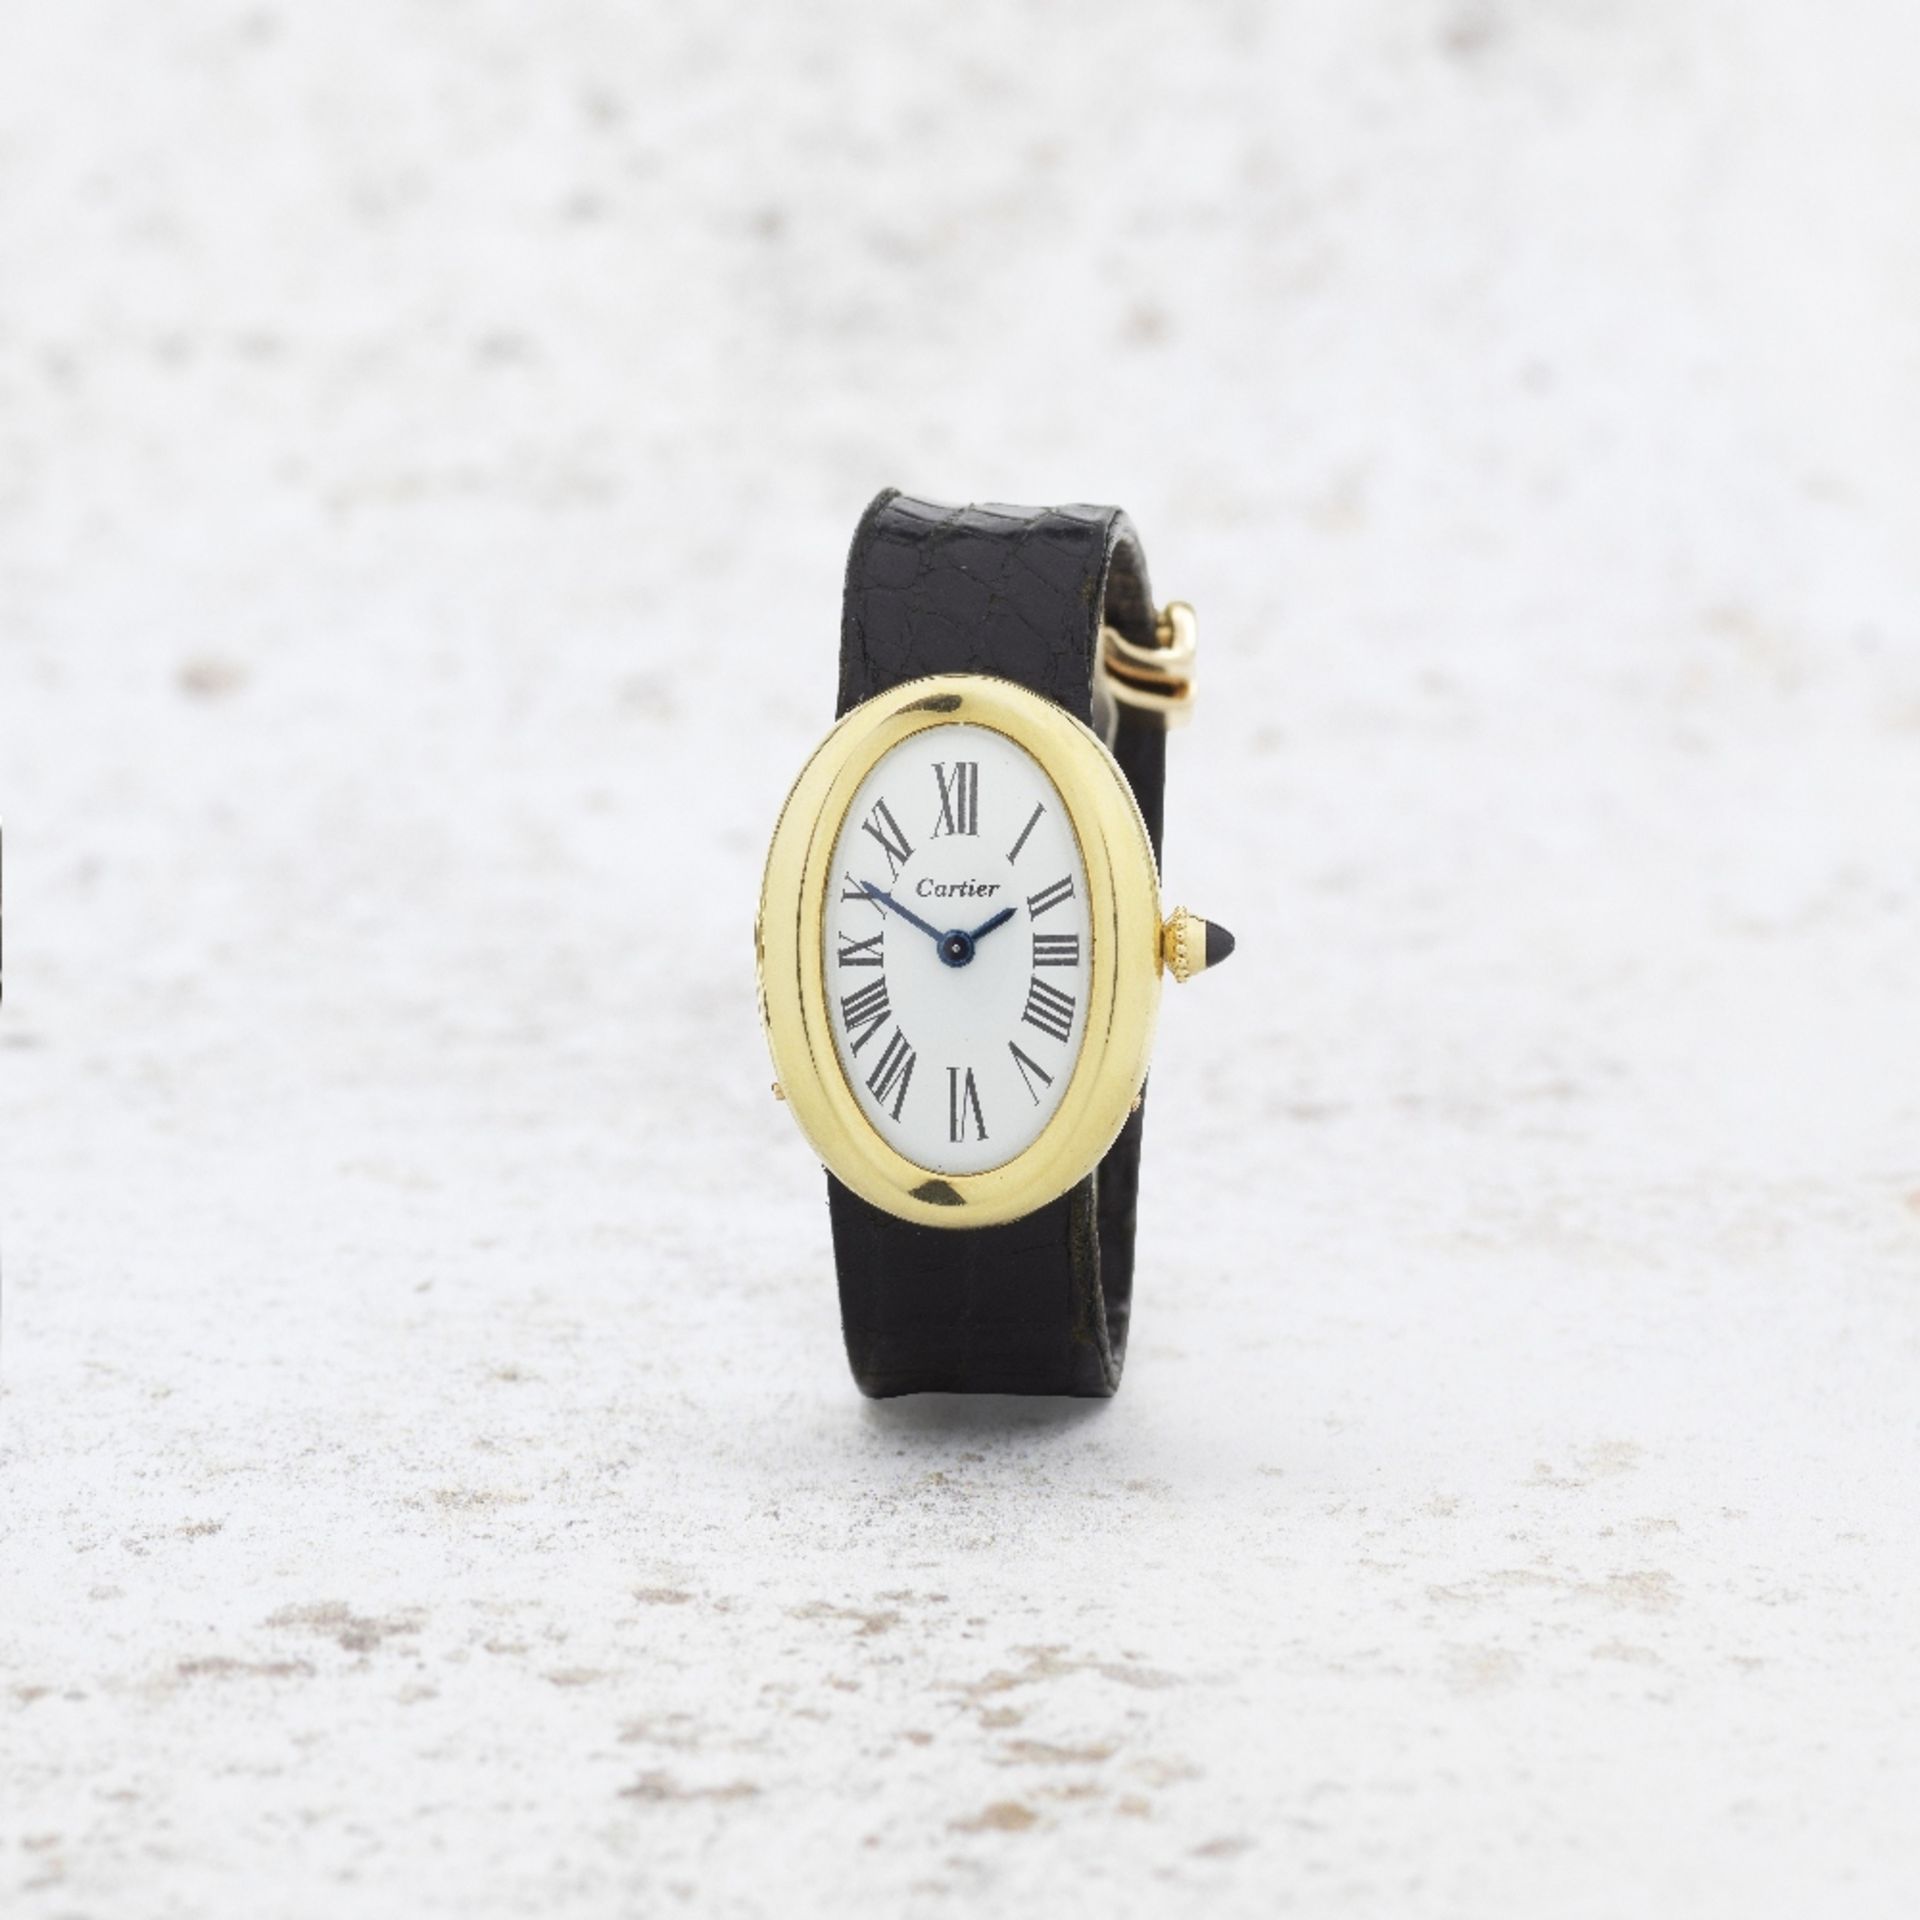 Cartier. A fine and rare lady's 18K gold manual wind wristwatch from the London workshops Baign...